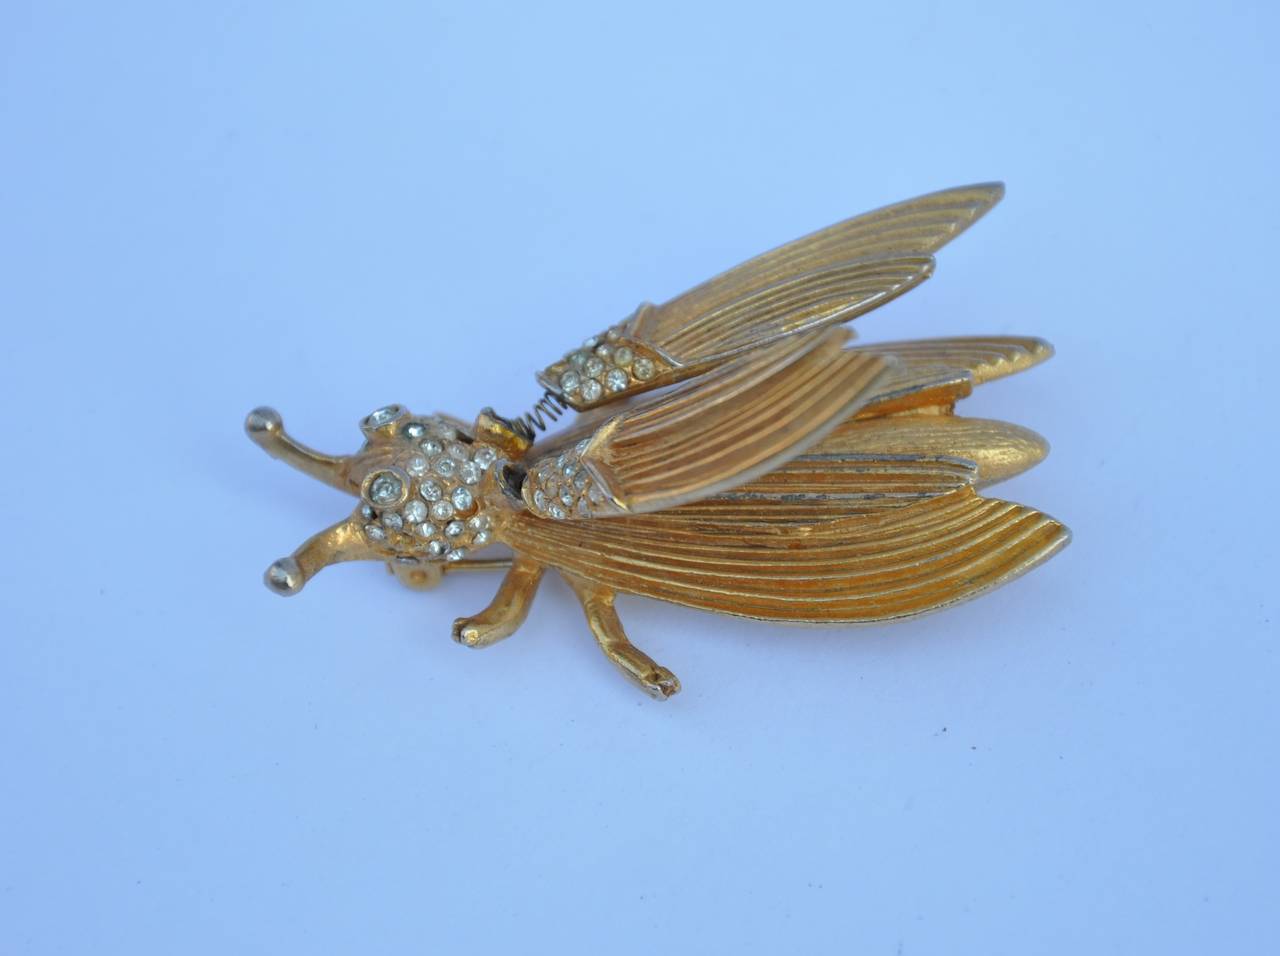            This whimsical gilded gold tone "bug" brooch has wings helped by "springs", are movable. The eyes are accented with rhinestones with detailed engraved body and wings. The total length measures 2 1/4", width is 1